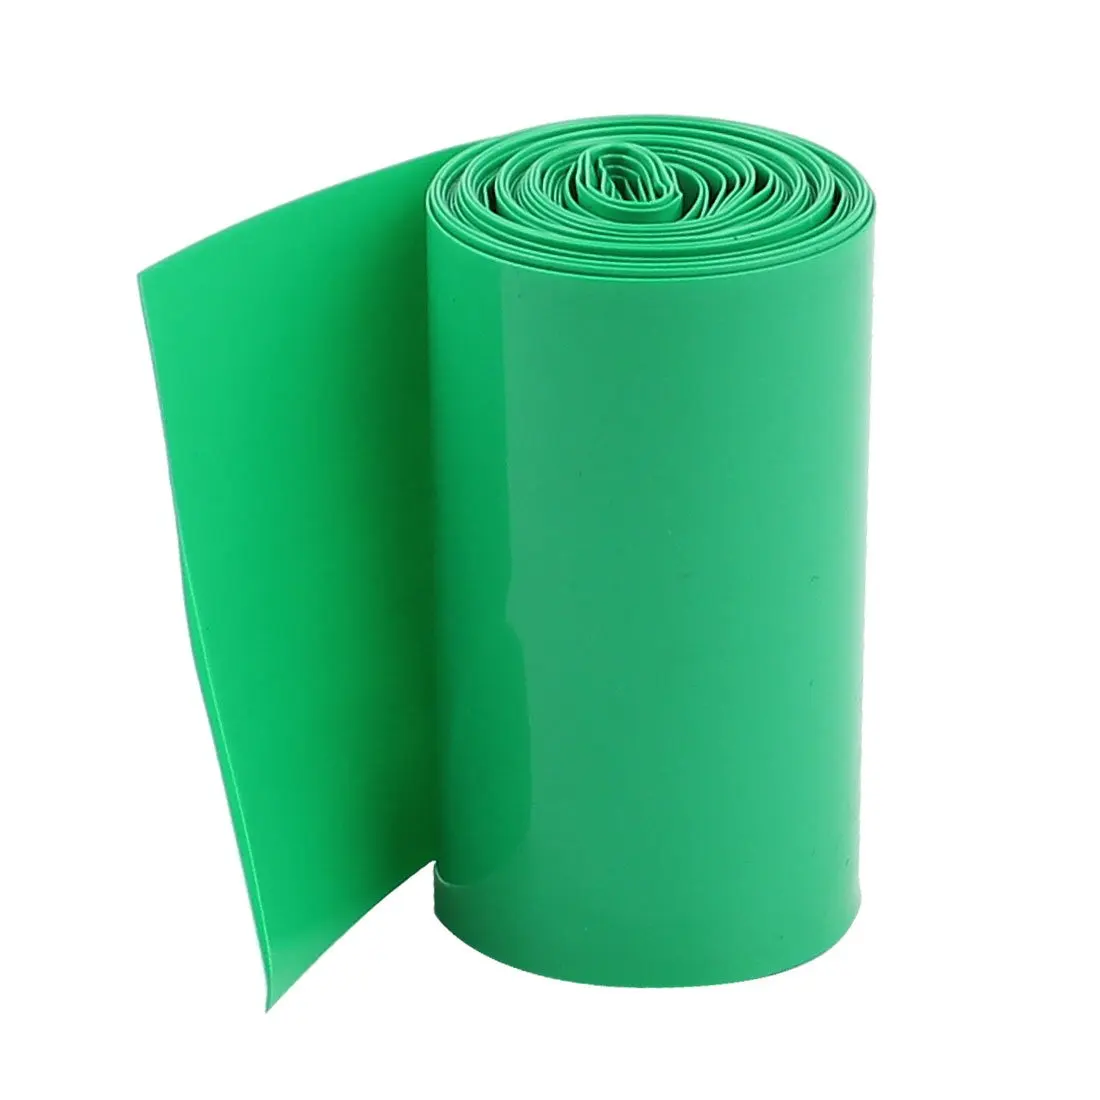 

Keszoox 2Meters Length 50mm Dark Green PVC Heat Shrinkable Tubing Heat shrink Wrap Cover for 2 x 18650 Battery